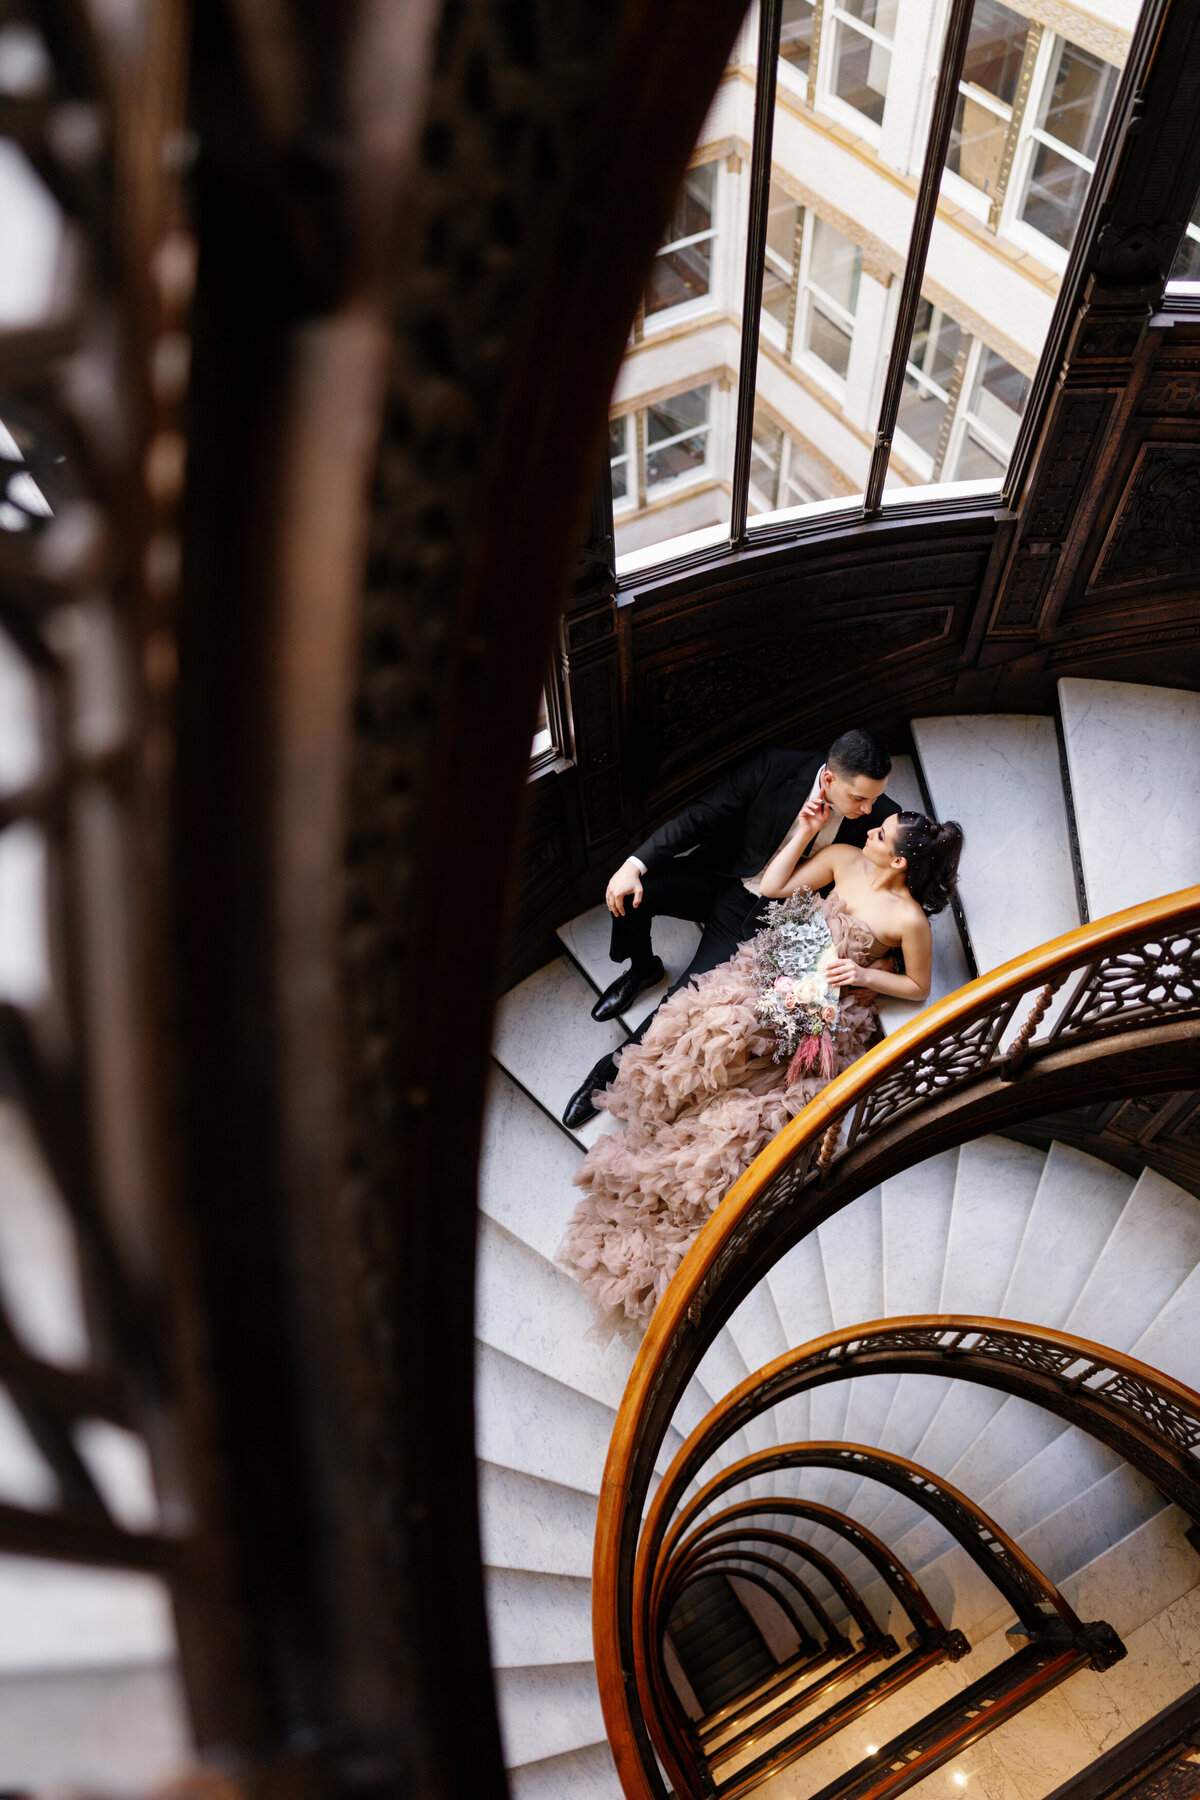 Aspen-Avenue-Chicago-Wedding-Photographer-Rookery-Engagement-Session-Histoircal-Stairs-Moody-Dramatic-Magazine-Unique-Gown-Stemming-From-Love-Emily-Rae-Bridal-Hair-FAV-31